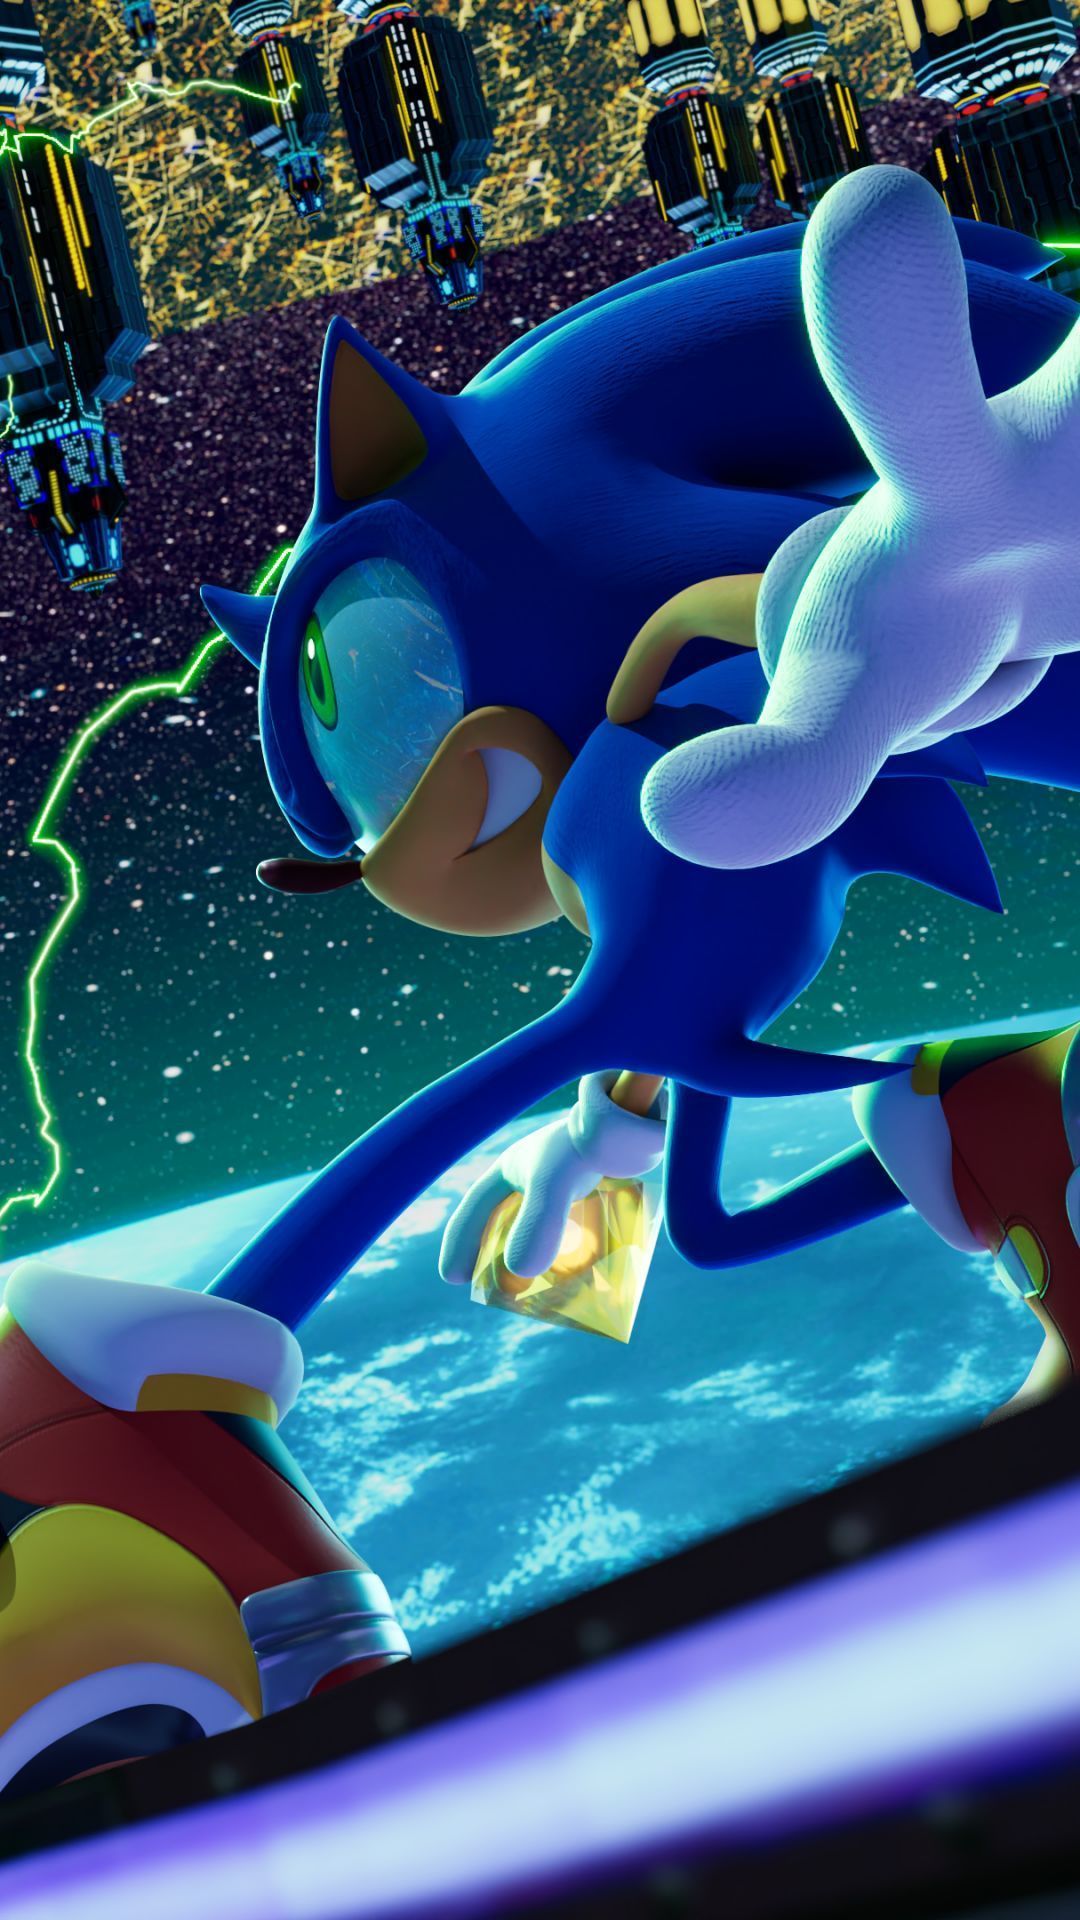 Sonic the Hedgehog wallpaper for iPhone and Android - Sonic